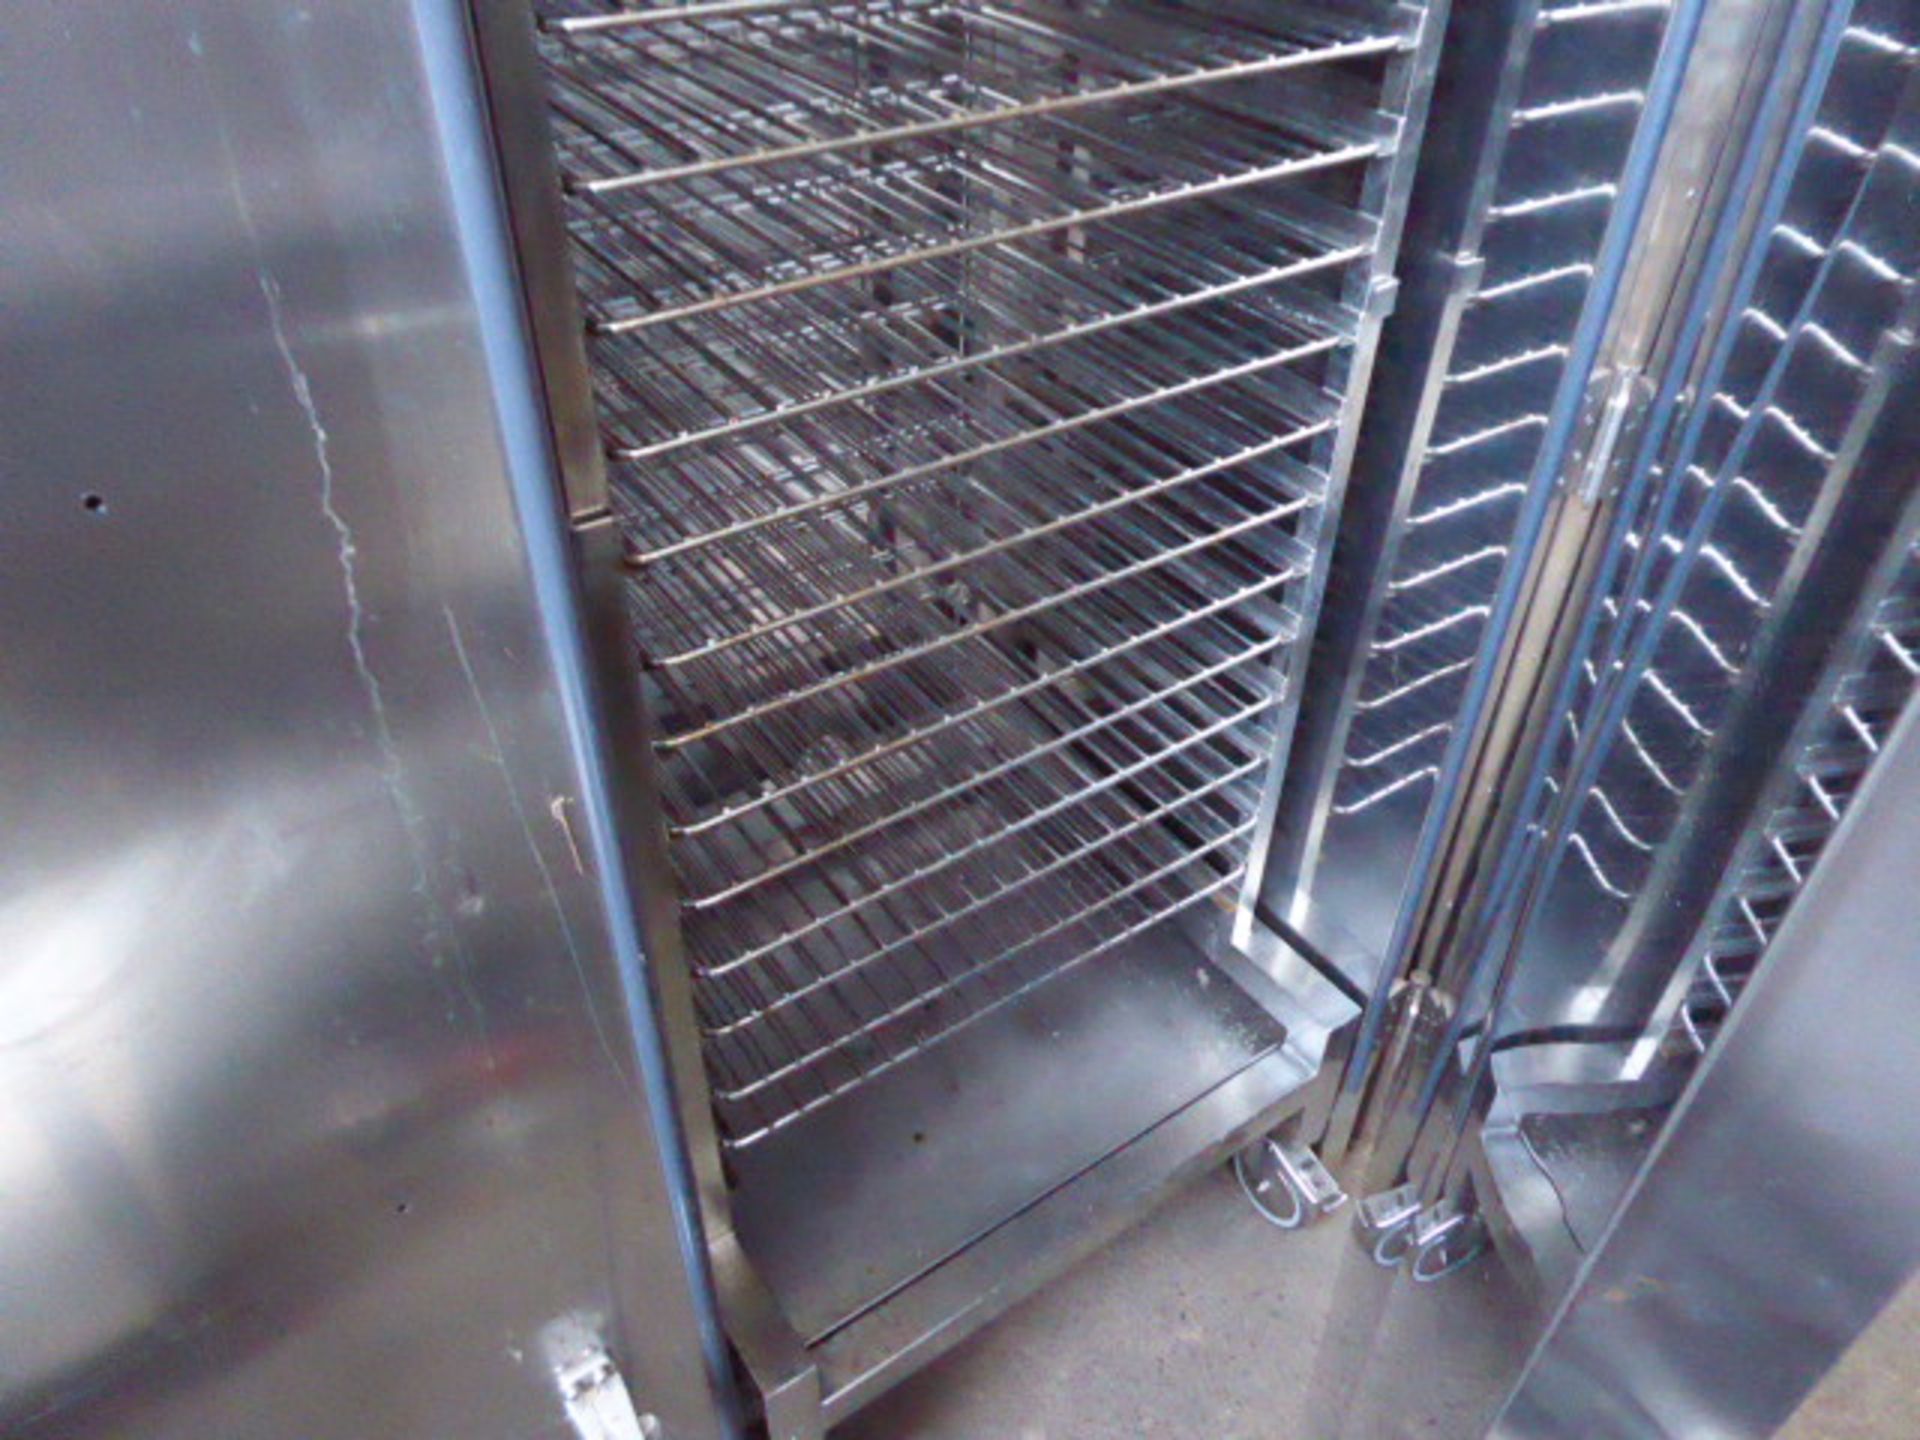 110cm Convotherm regeneration oven with 18 tray walk in trolley 3 phase electric - Image 2 of 2